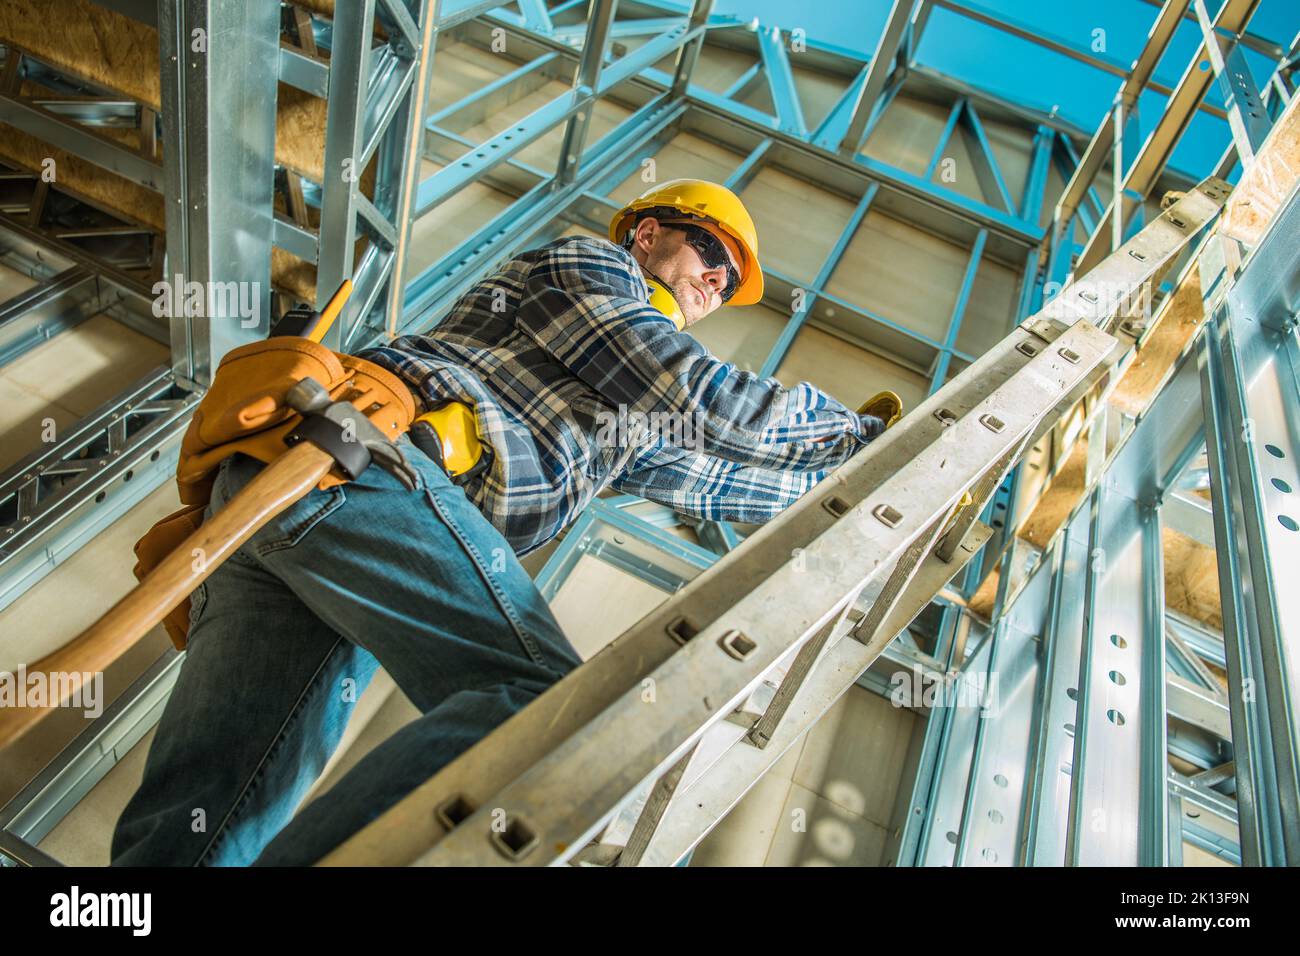 Construction Worker with a Hammer Hanging on His Tool Belt Stepping Up the Extension Ladder During Working on Building Steel Skeleton Frame of the Hou Stock Photo